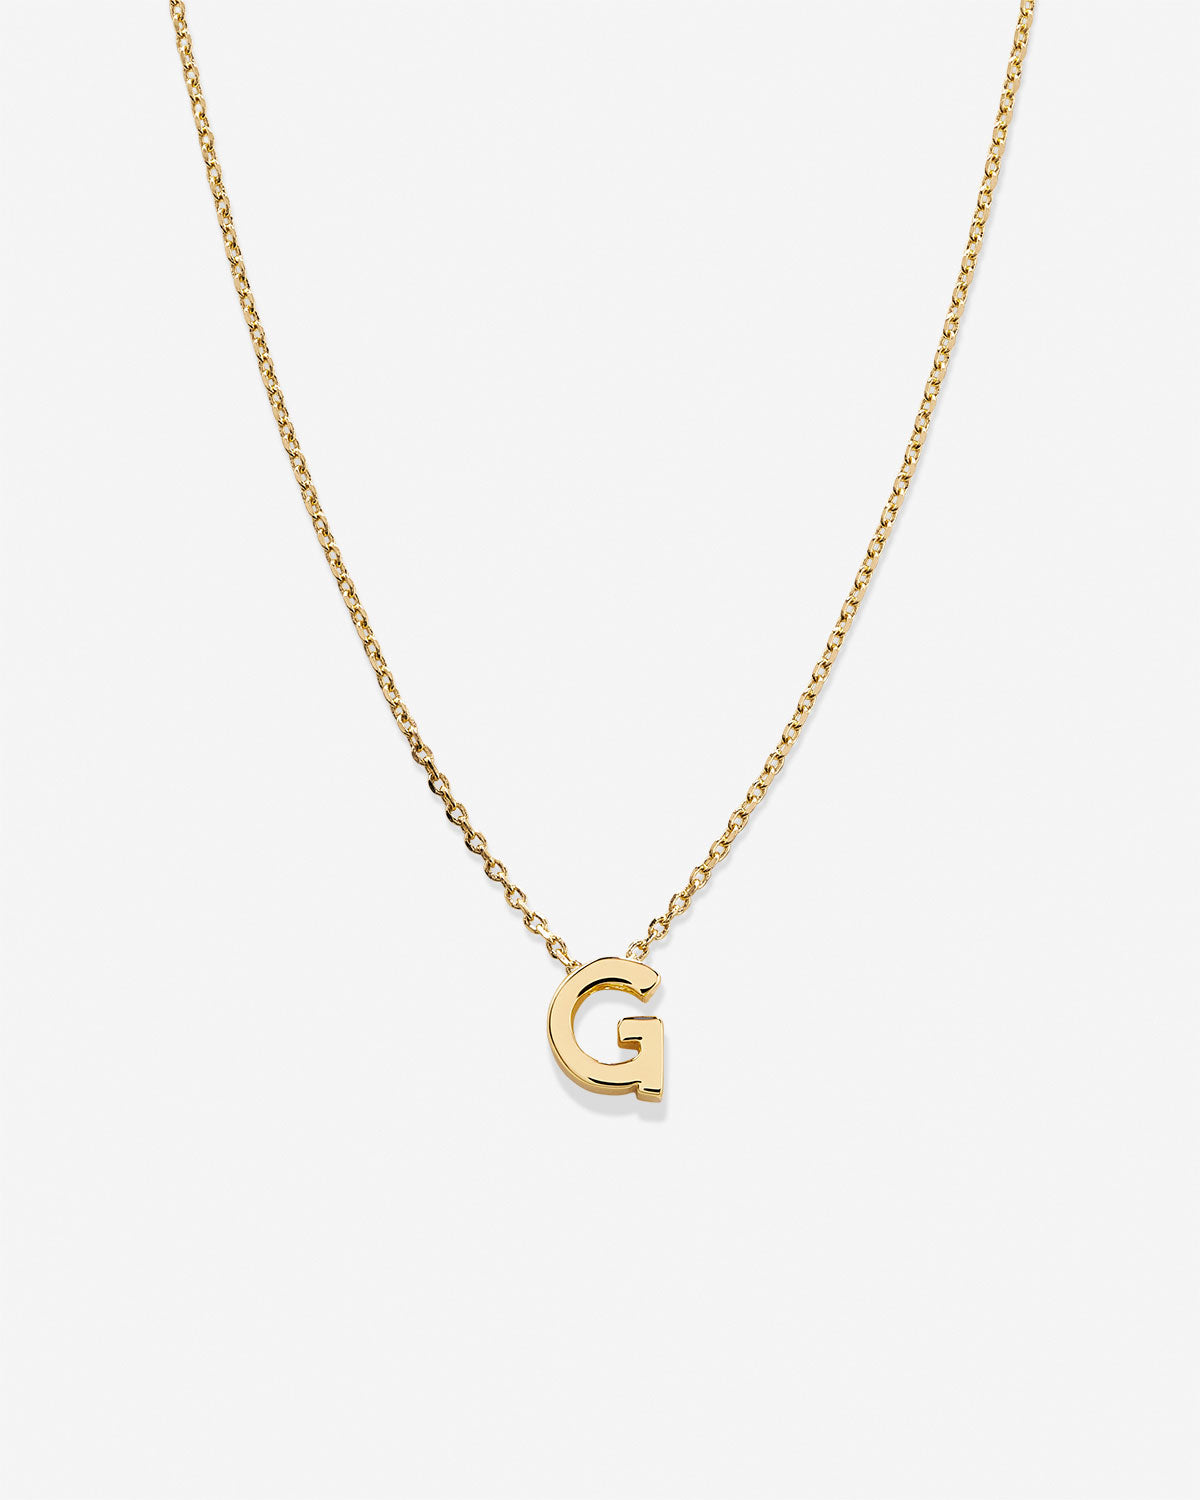 Buy Initial G Sterling Silver Pendant Necklace, Silver Initial G, Silver Letter  G, Initial Letter G Pendant. Online in India - Etsy